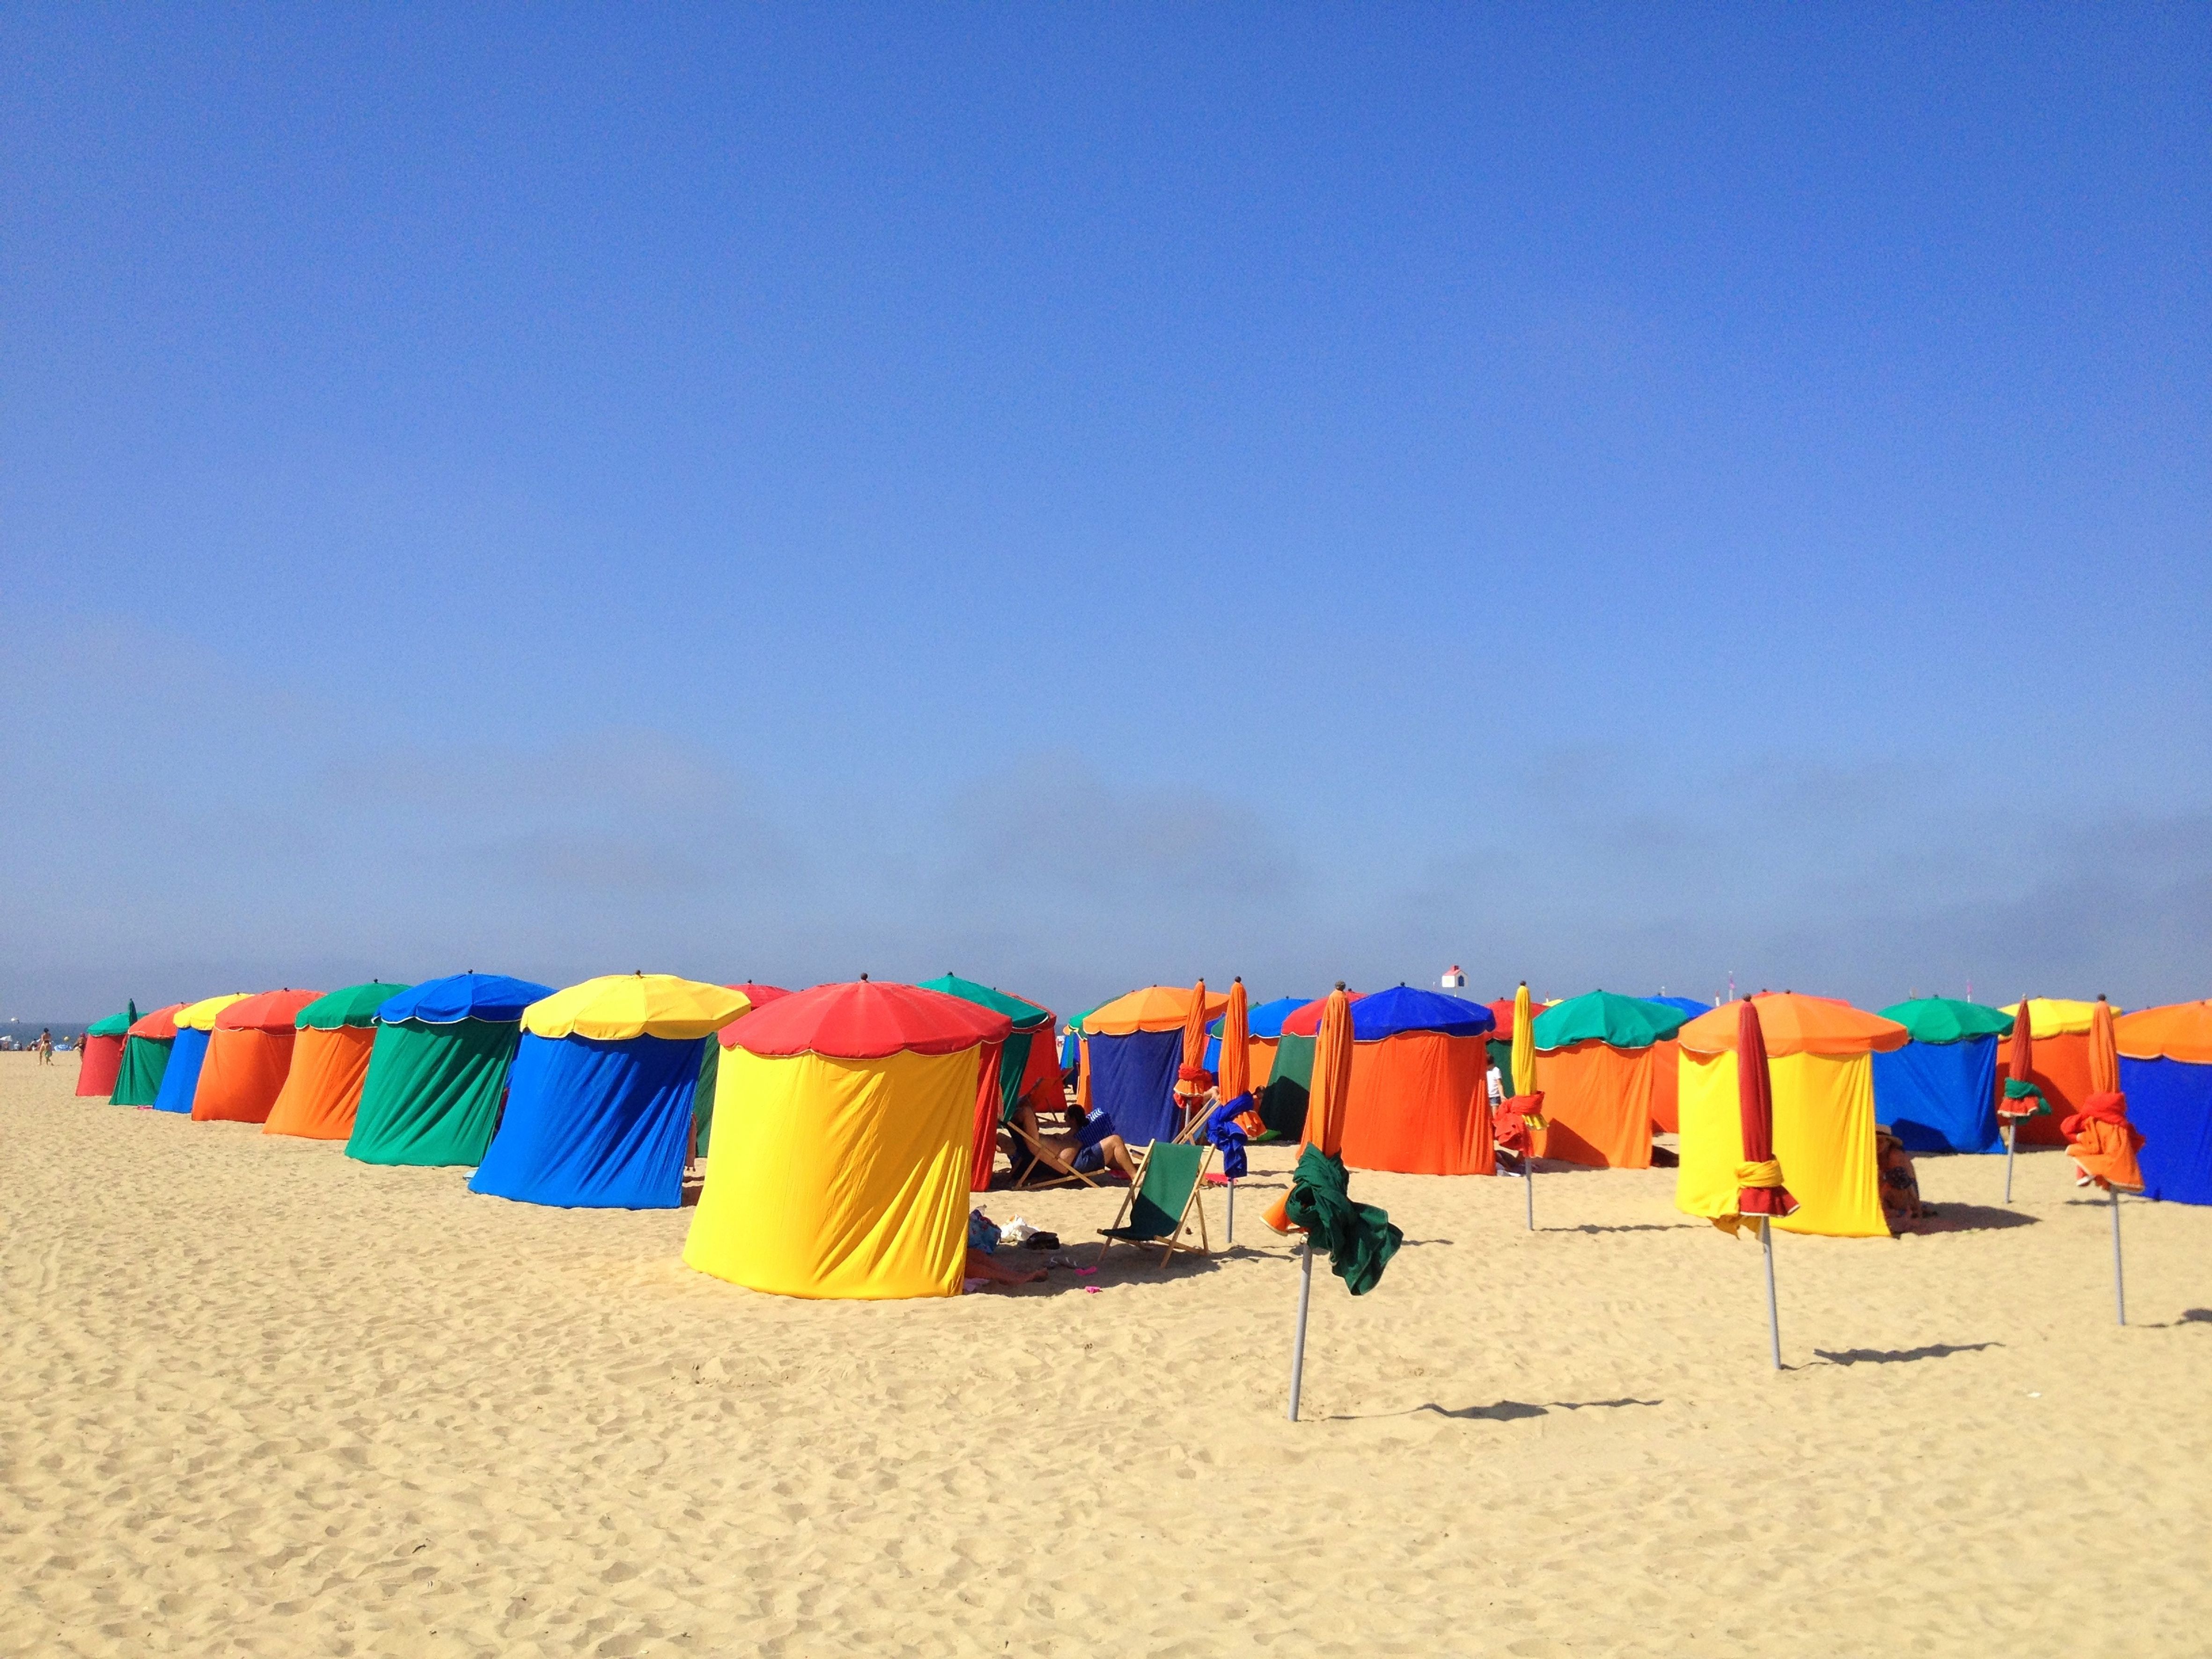 Tents in Deauville